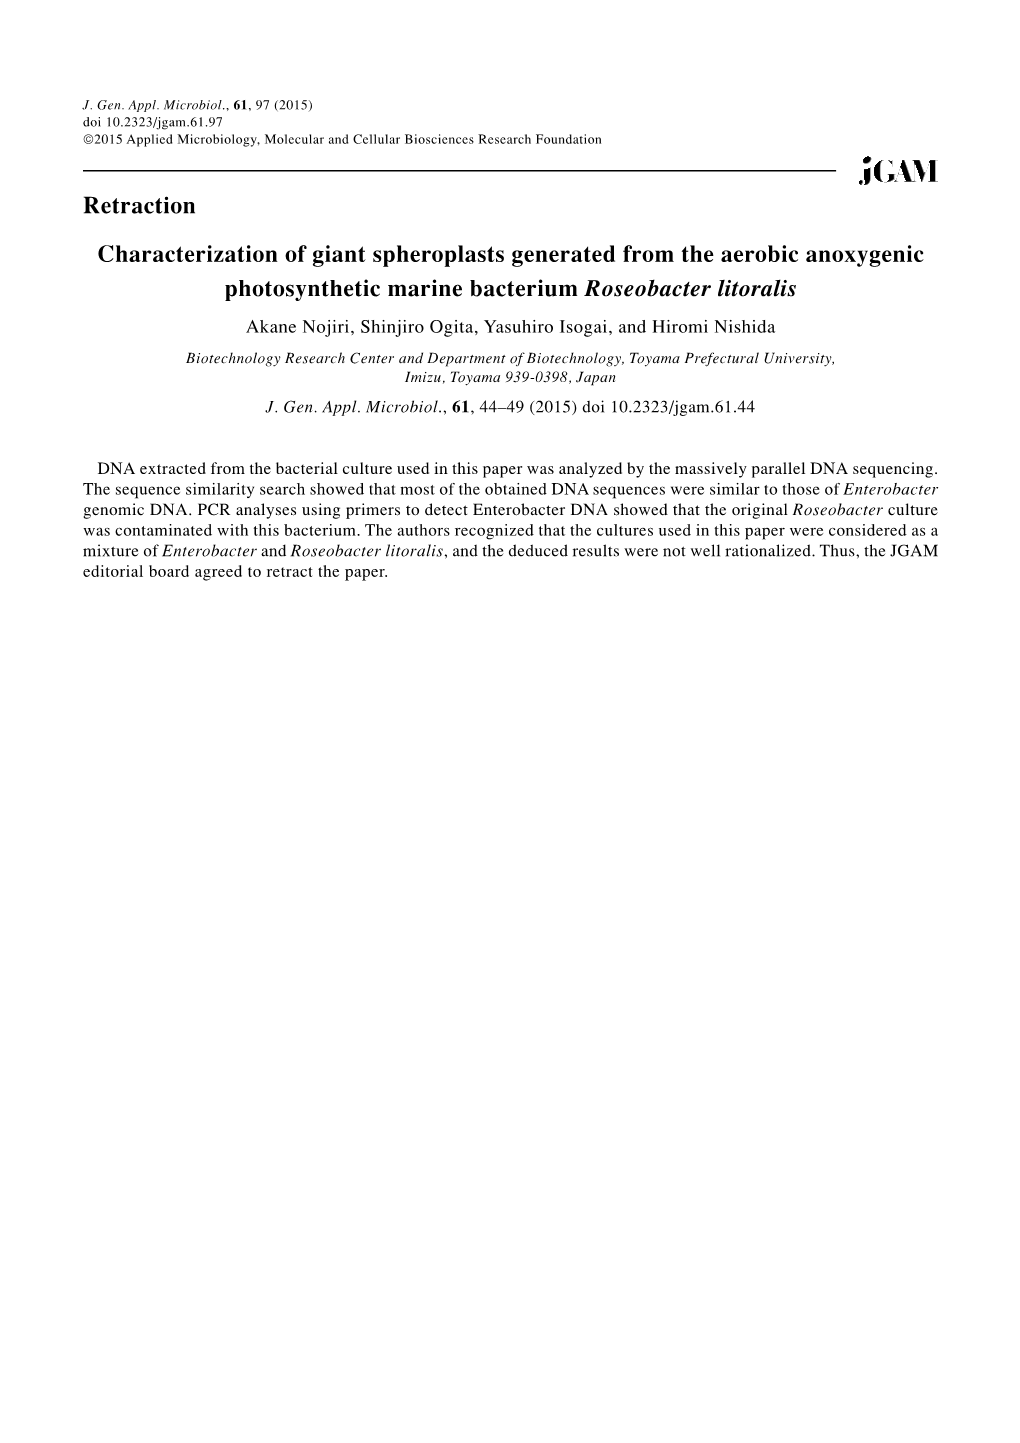 Retraction: Characterization of Giant Spheroplasts Generated from The